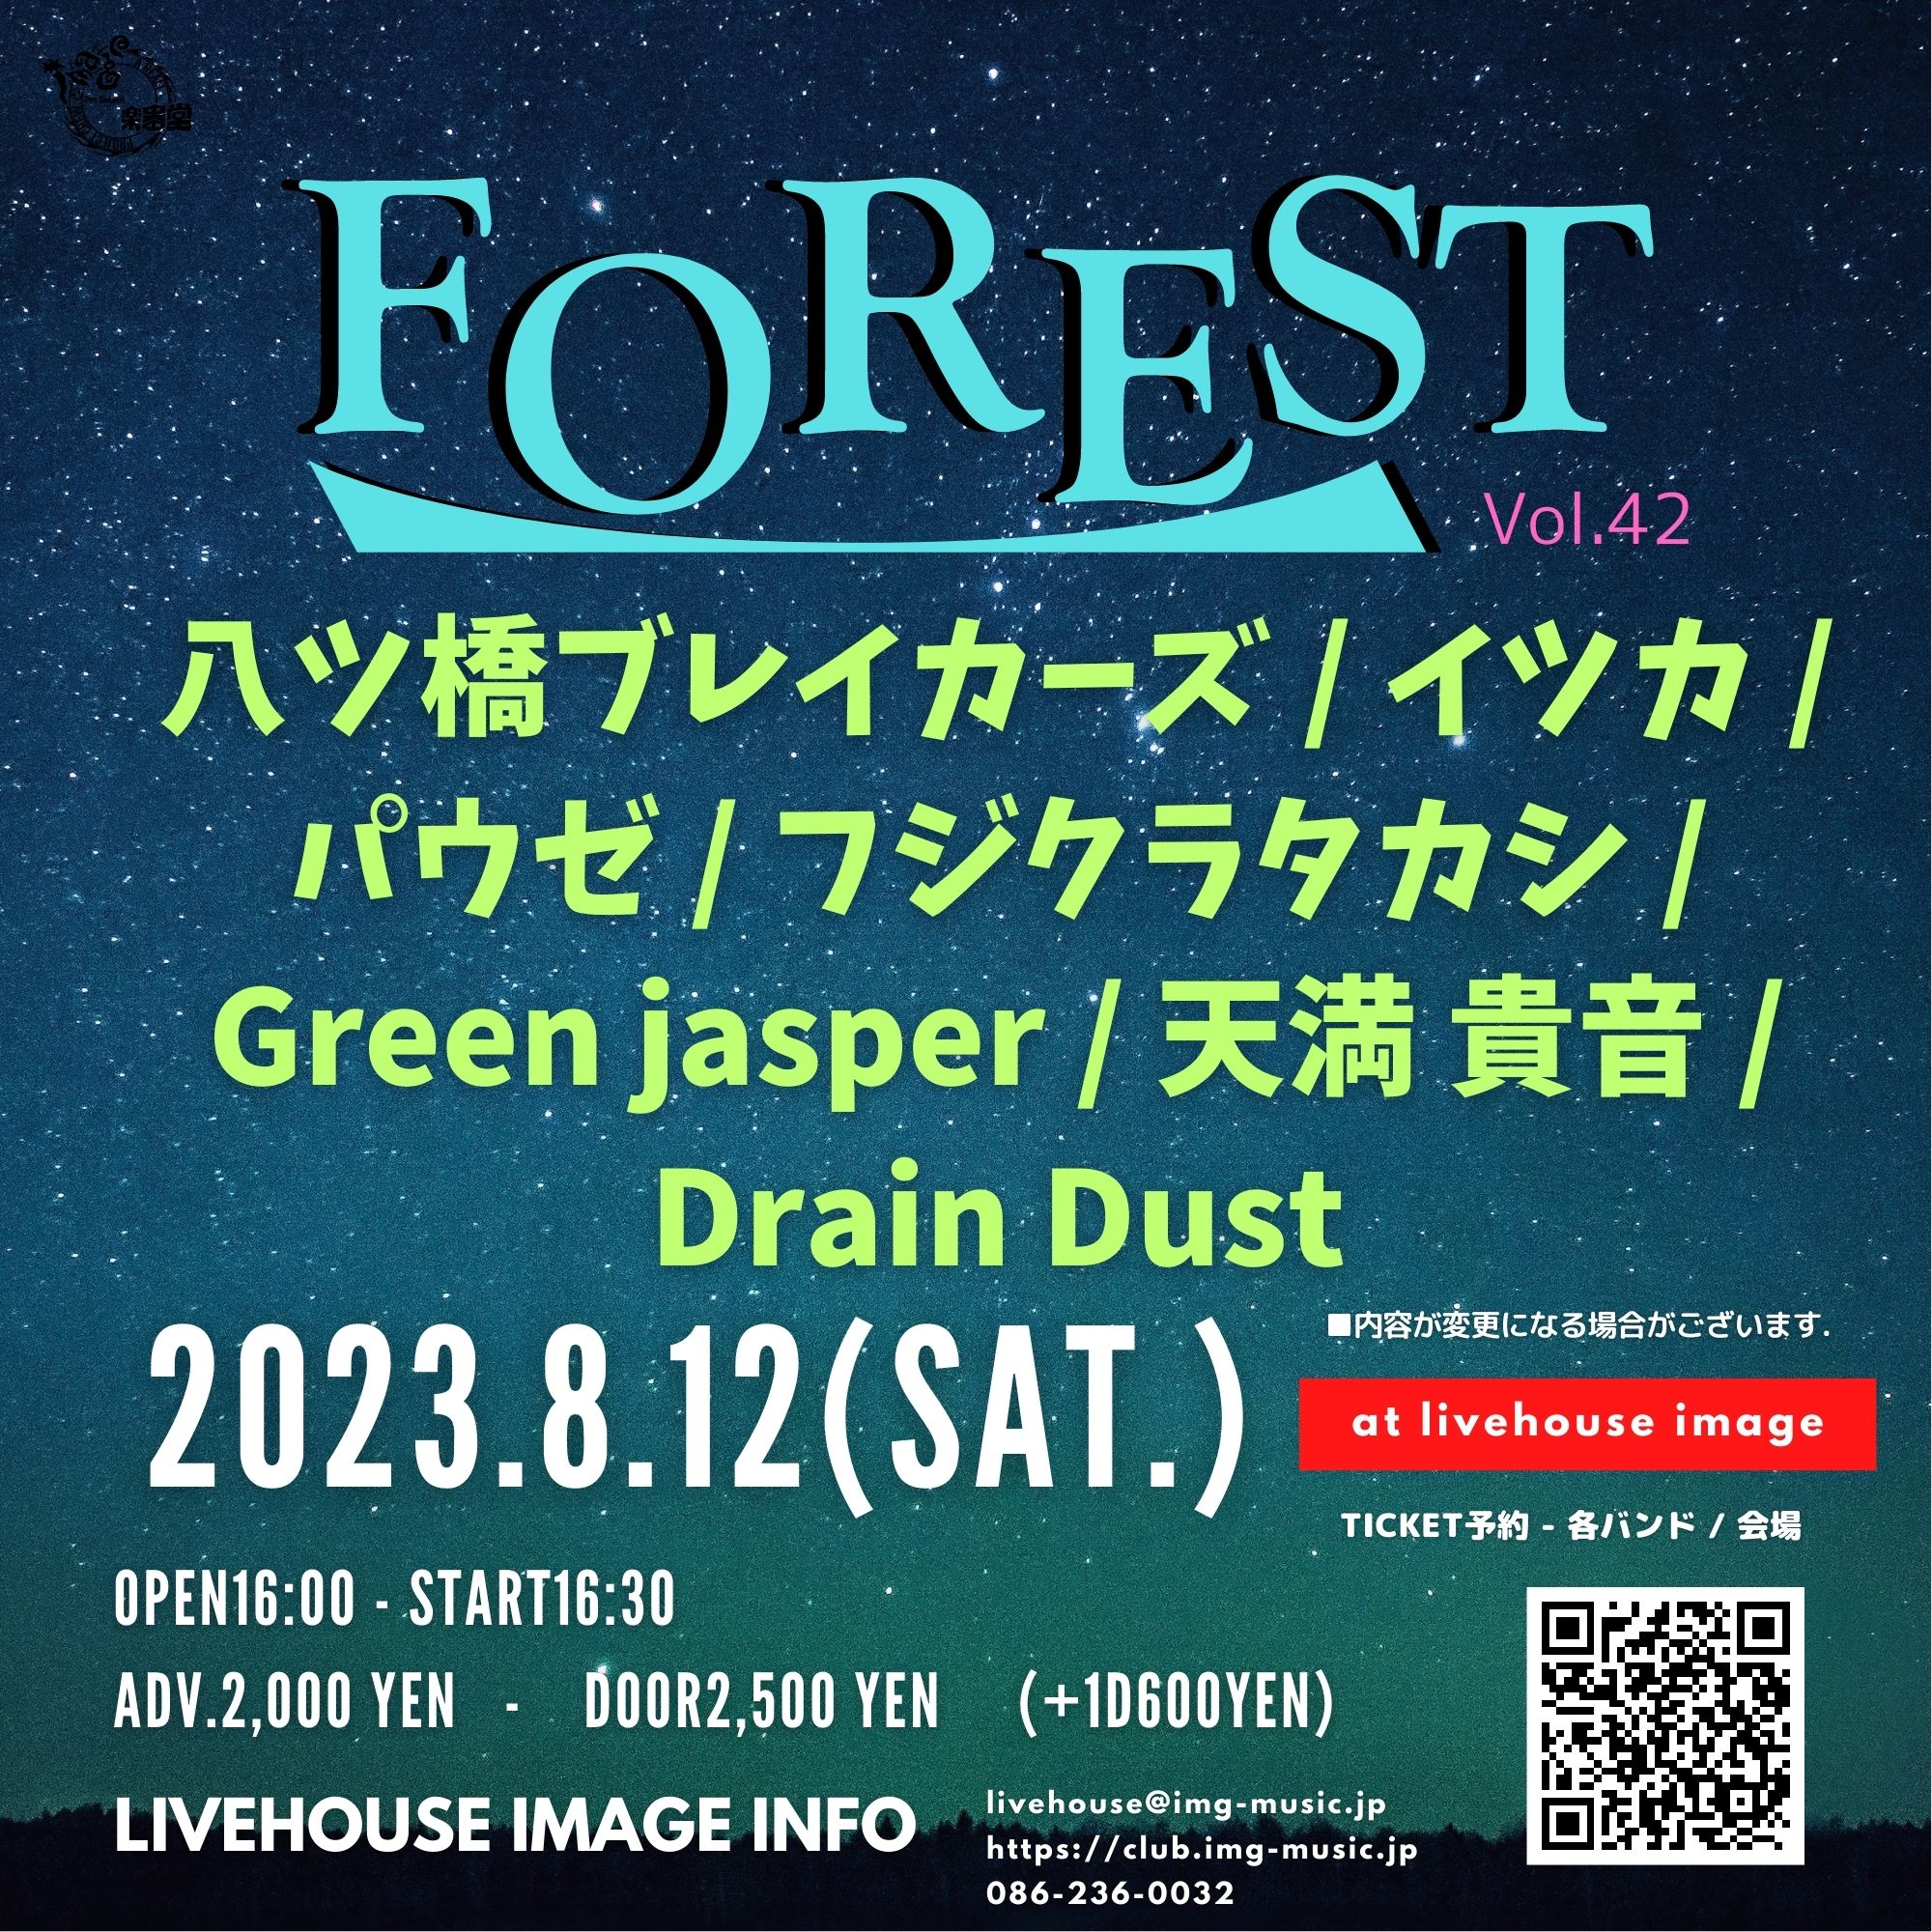 FOREST vol.42